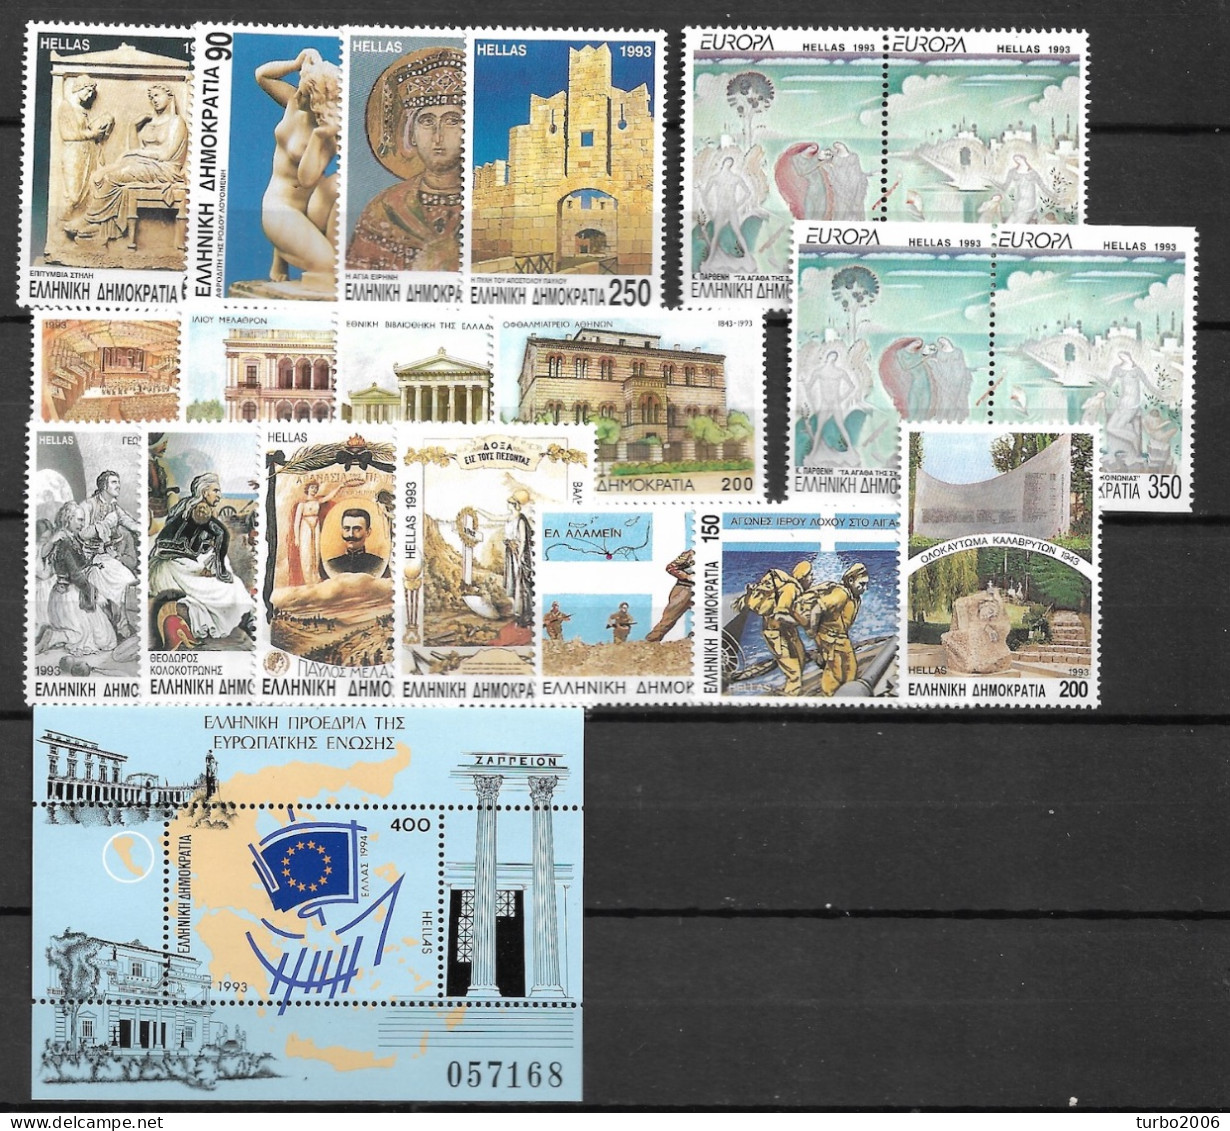 GREECE 1993 Complete All Sets + Block MNH Vl. 1878 / 1894 + B 11 - Full Years